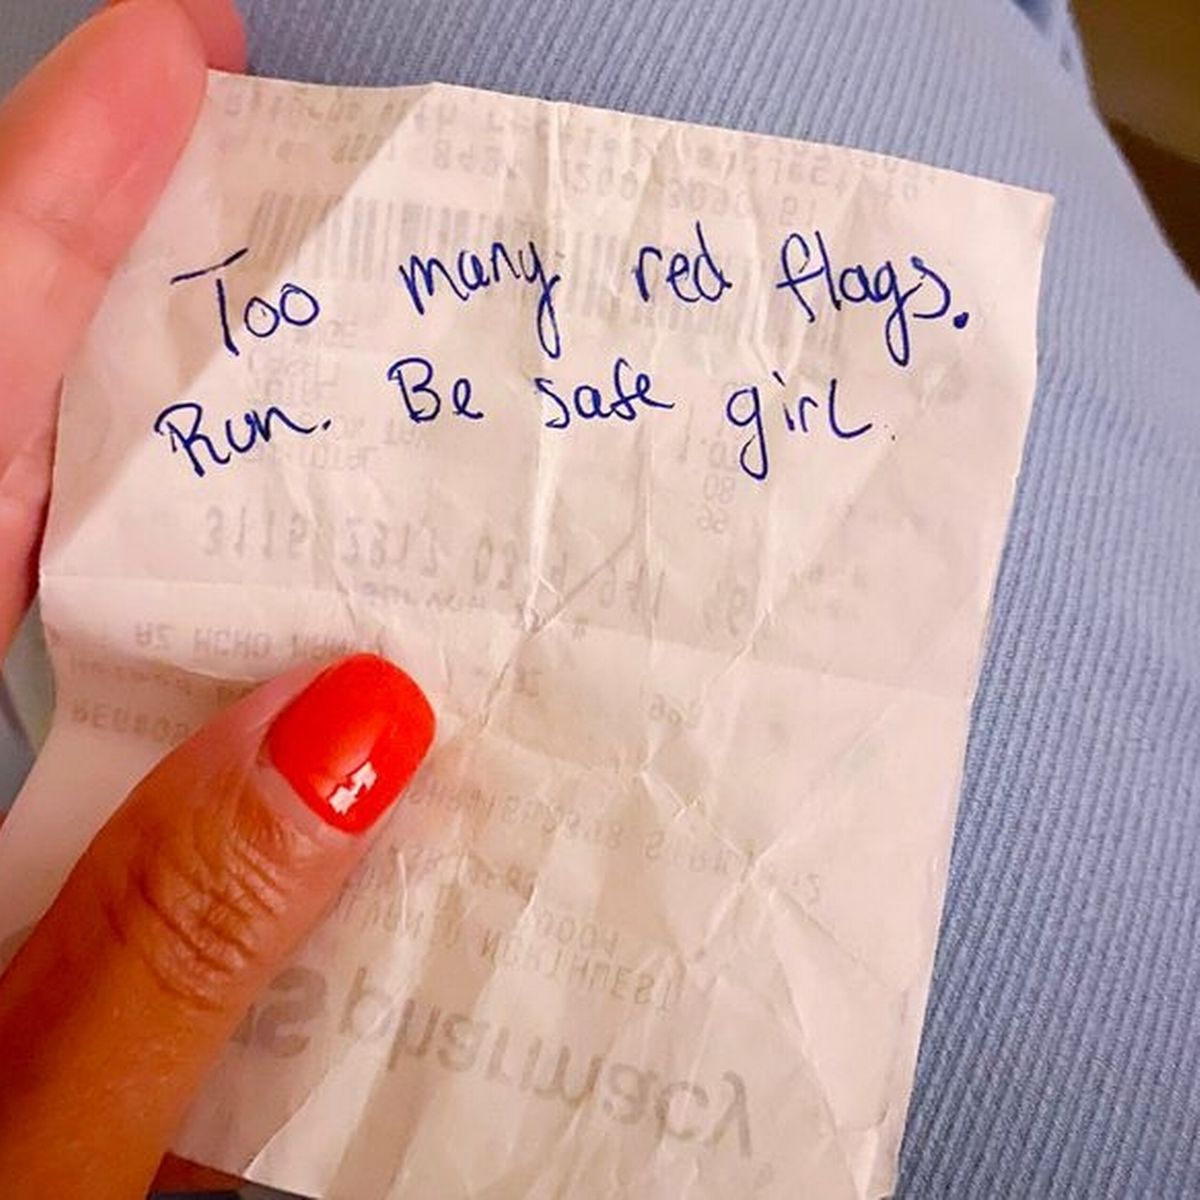 Stranger’s Worrying Note Saves A Woman on Date